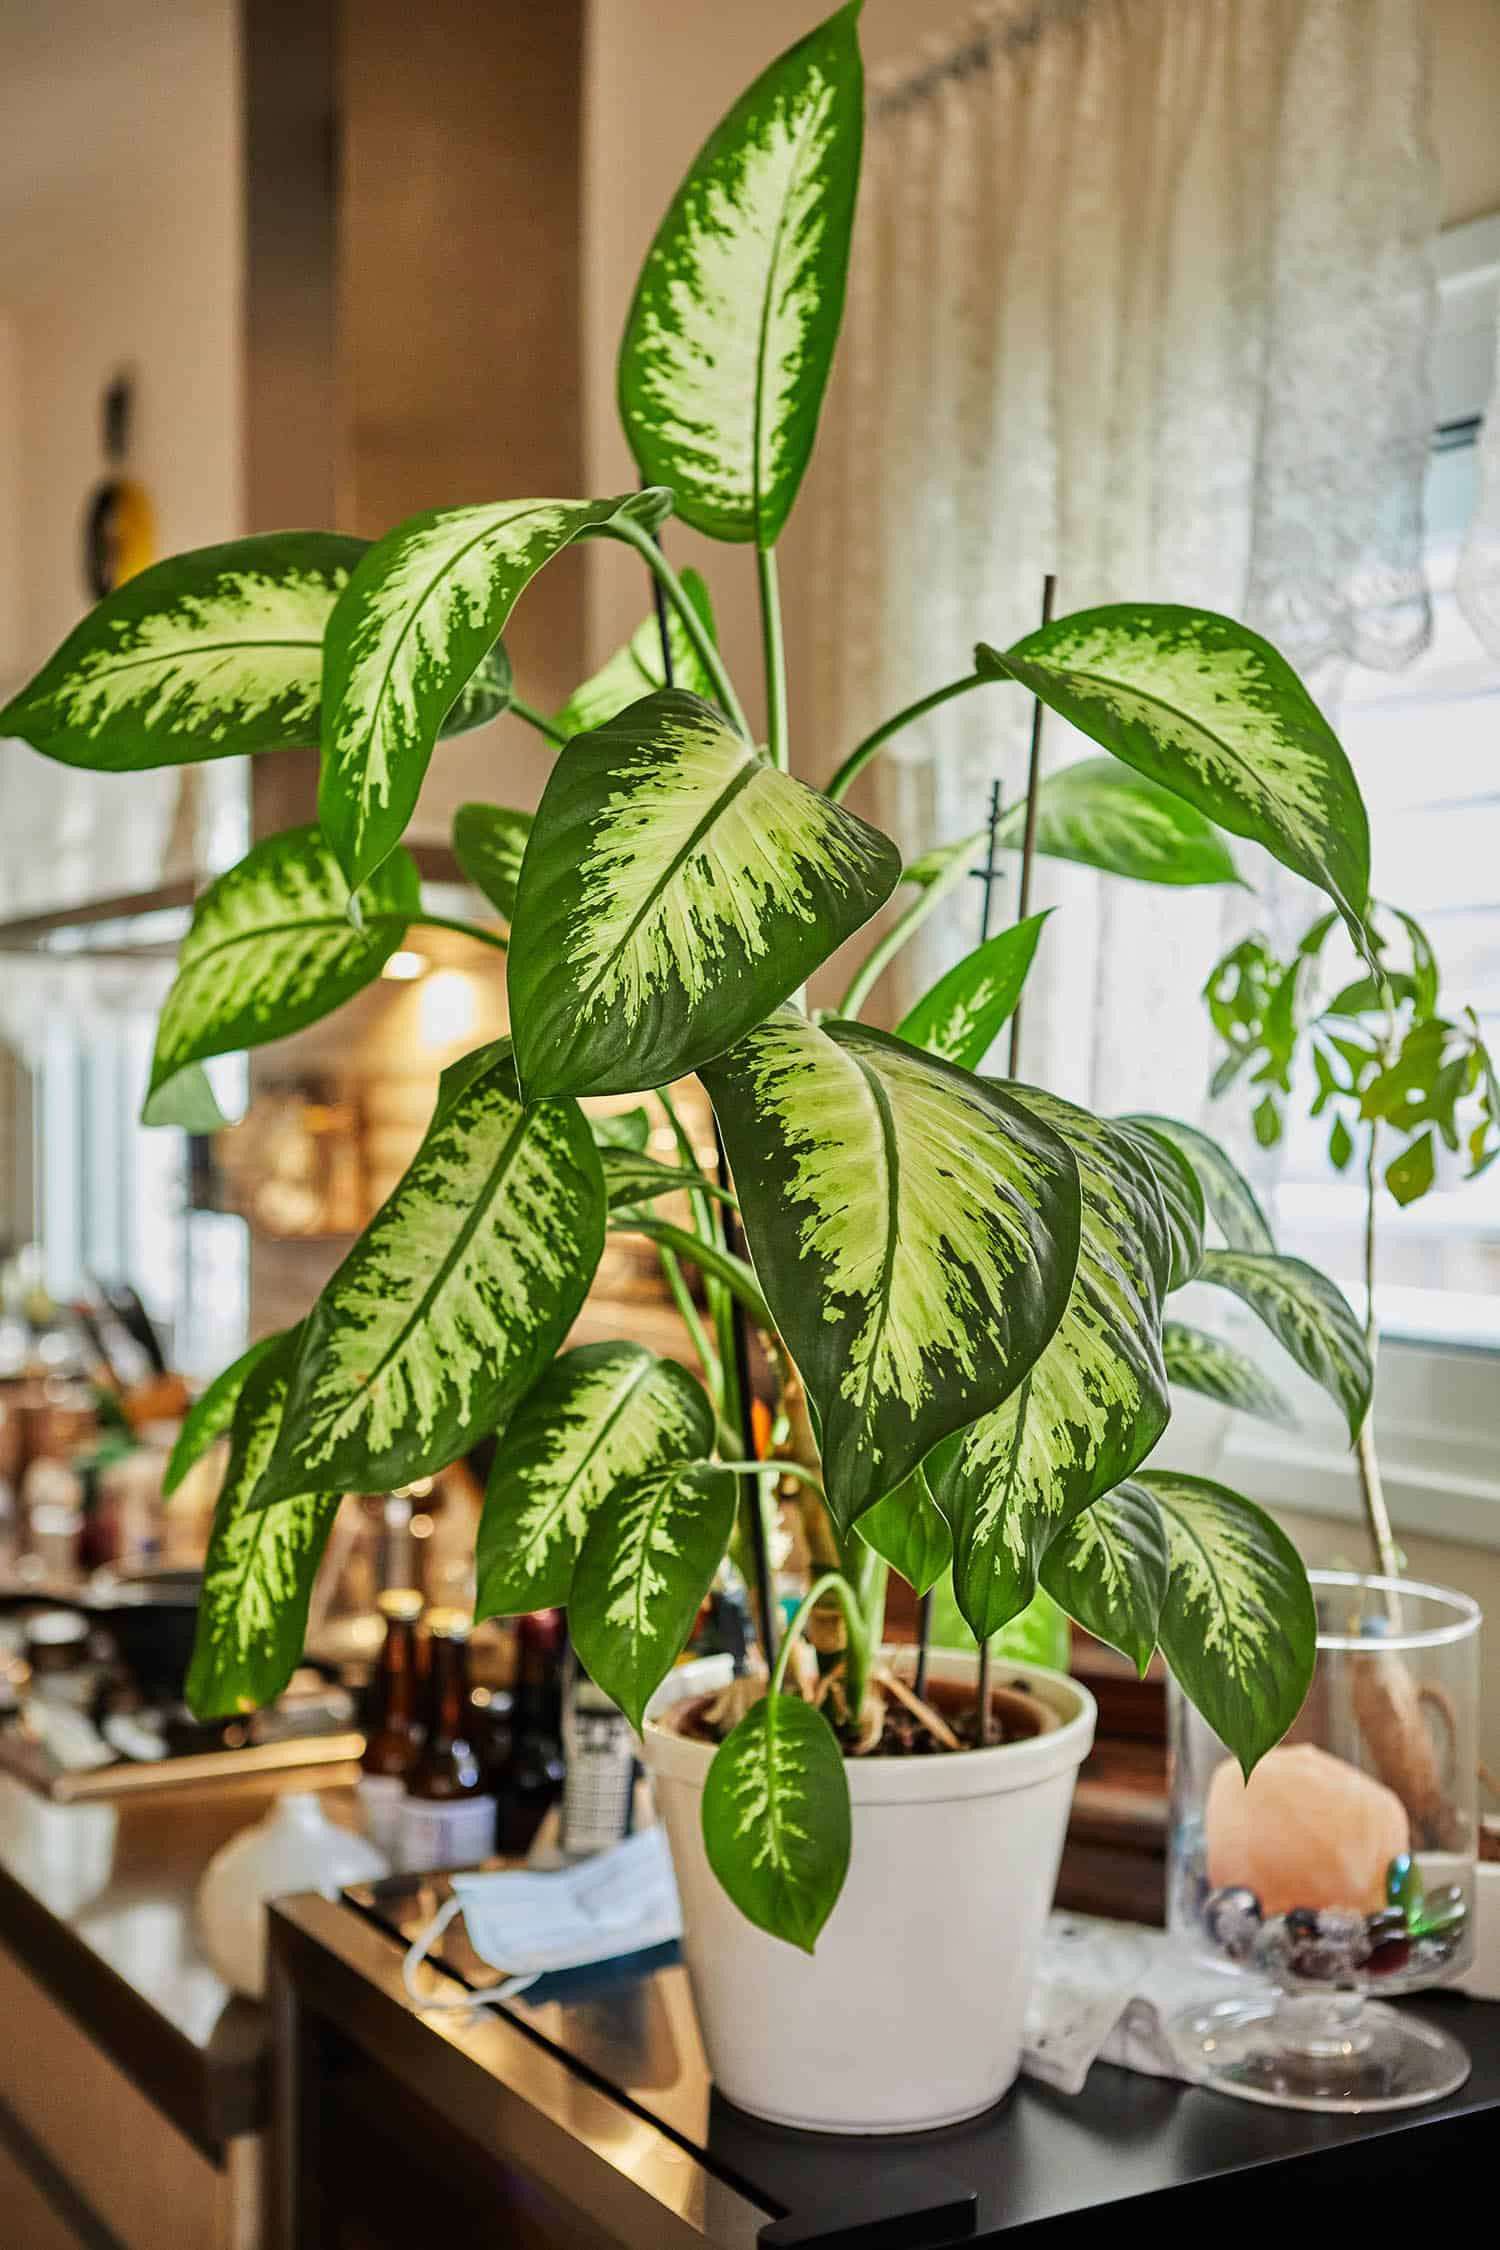 Can You Propagate A Dumb Cane From A Leaf Or Stem Cutting? – The